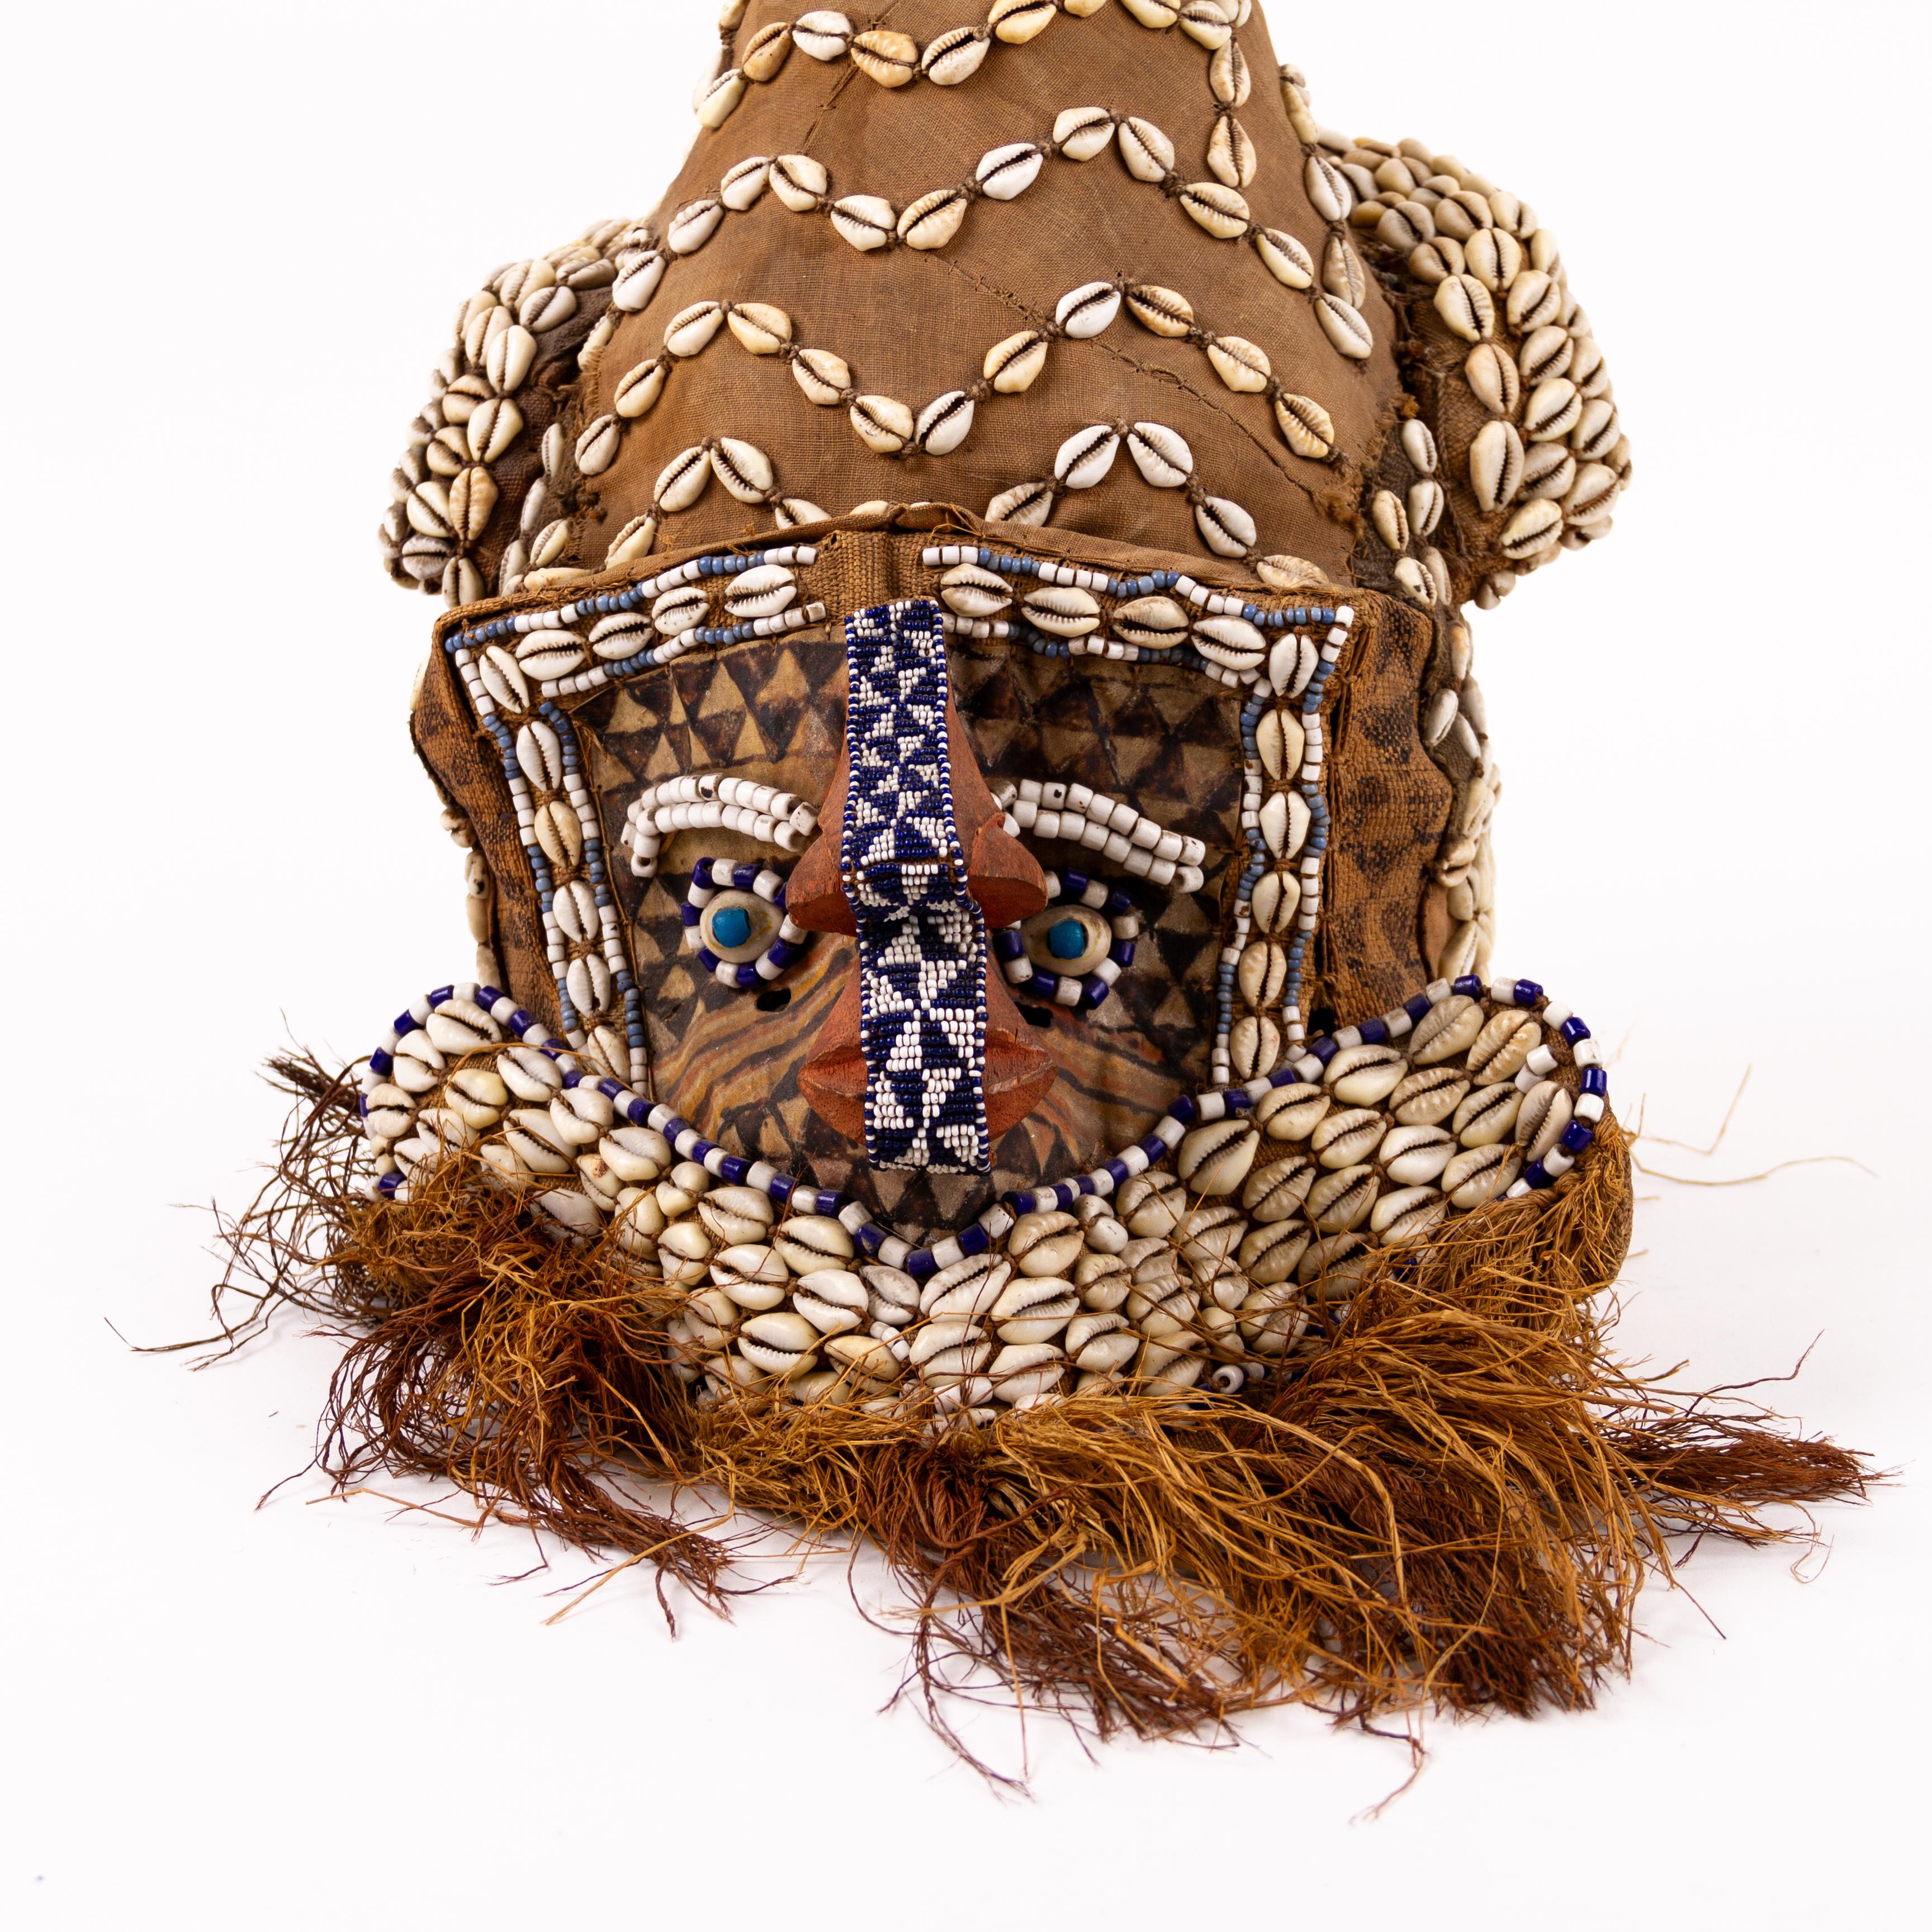 Mid 20thC Kuba Helmet Tribal Mask Shells, Animal Fibres, Raffia

A Kuba helmet refers to a type of ceremonial headgear created by the Kuba people of Central Africa, particularly in the Democratic Republic of Congo. The Kuba people have a rich